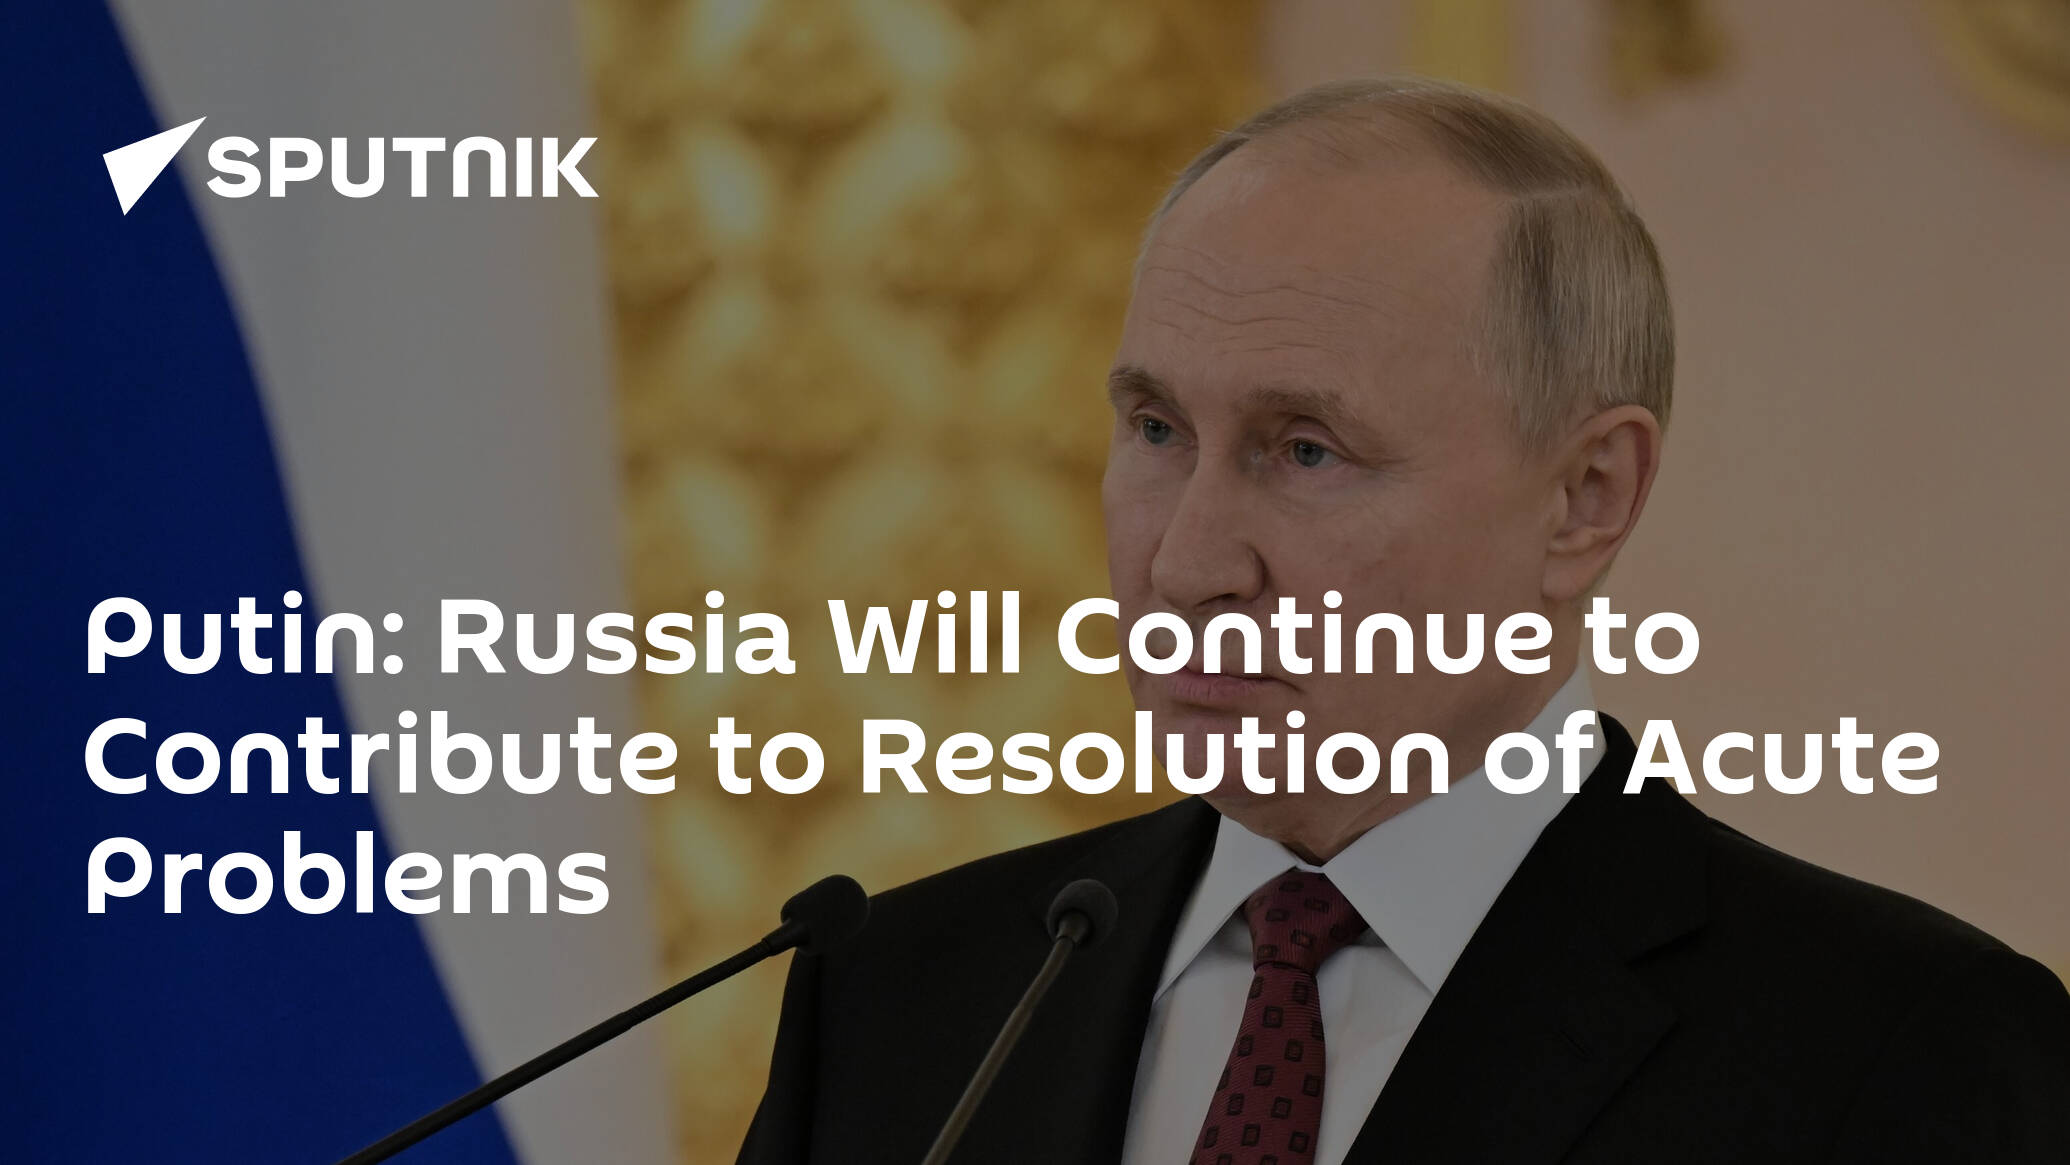 Putin: Russia Will Continue to Contribute to Resolution of Acute Problems